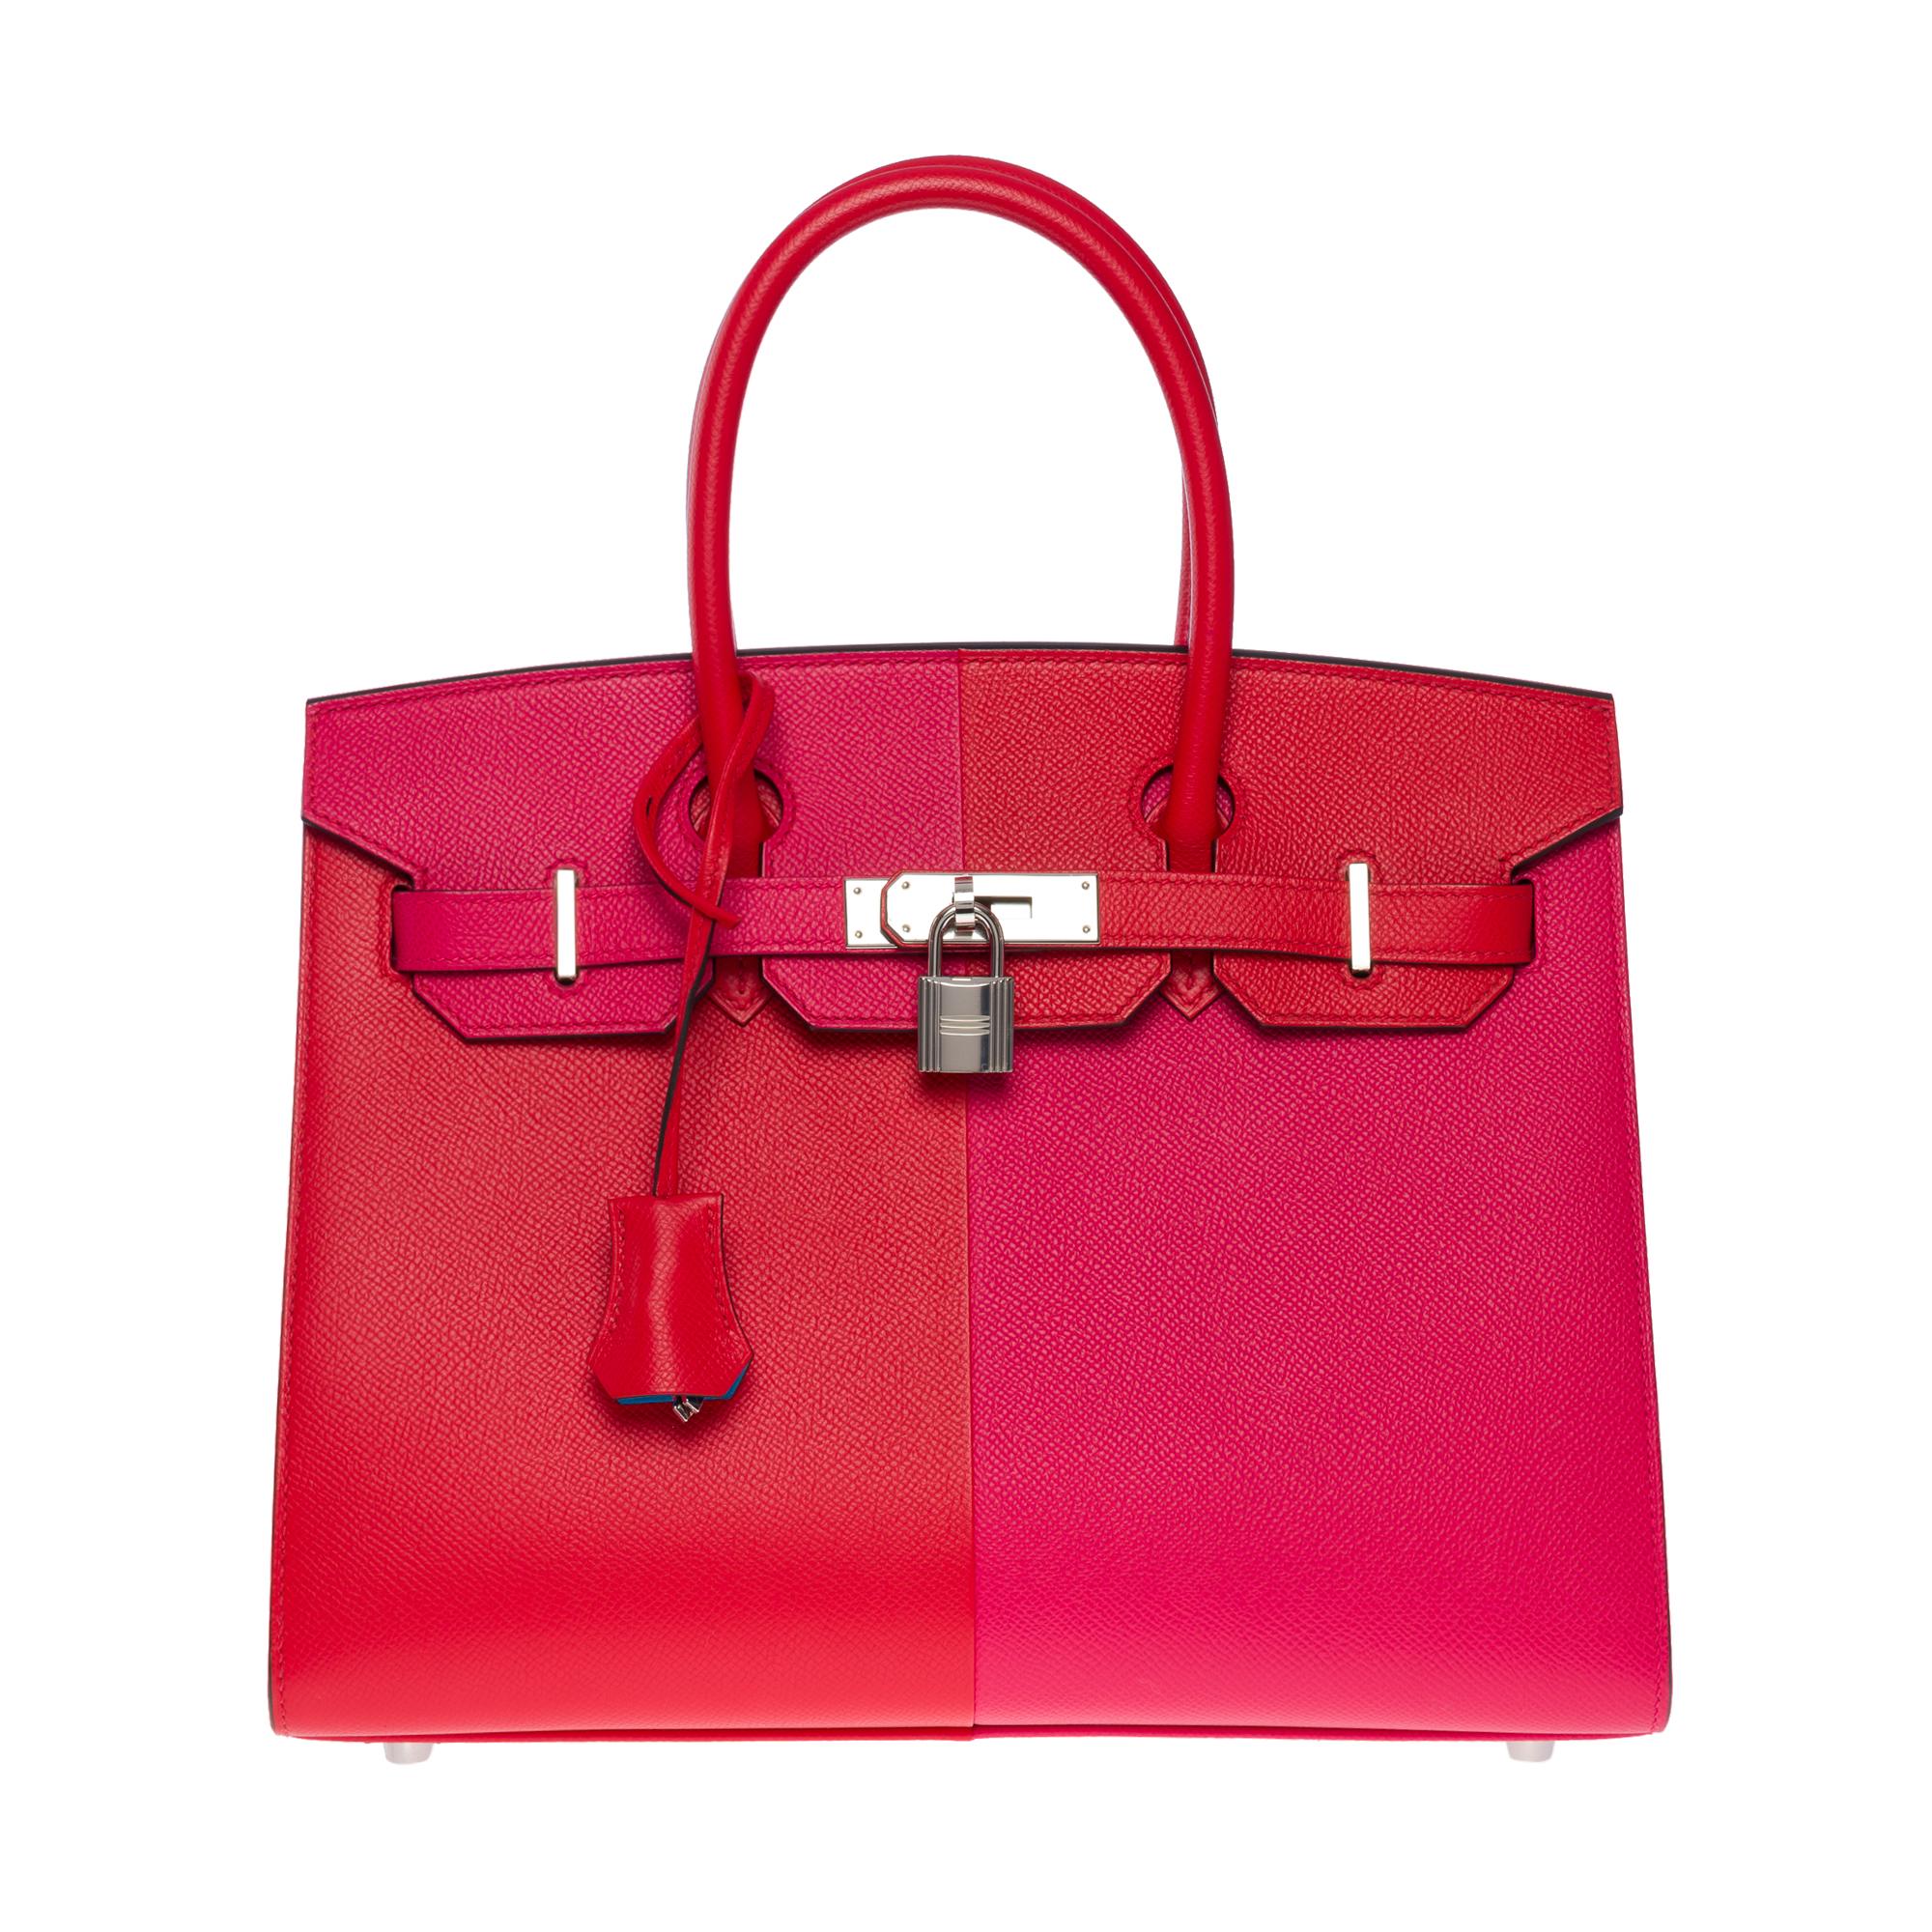 Spectacular Hermes Kazak limited edition Birkin 30 handbag in Epsom Rouge de Coeur and Rose Extreme leather, palladium silver metal hardware, double red leather handle for a hand carry

Flap closure
Zanzibar blue leather lining, one zippered pocket,